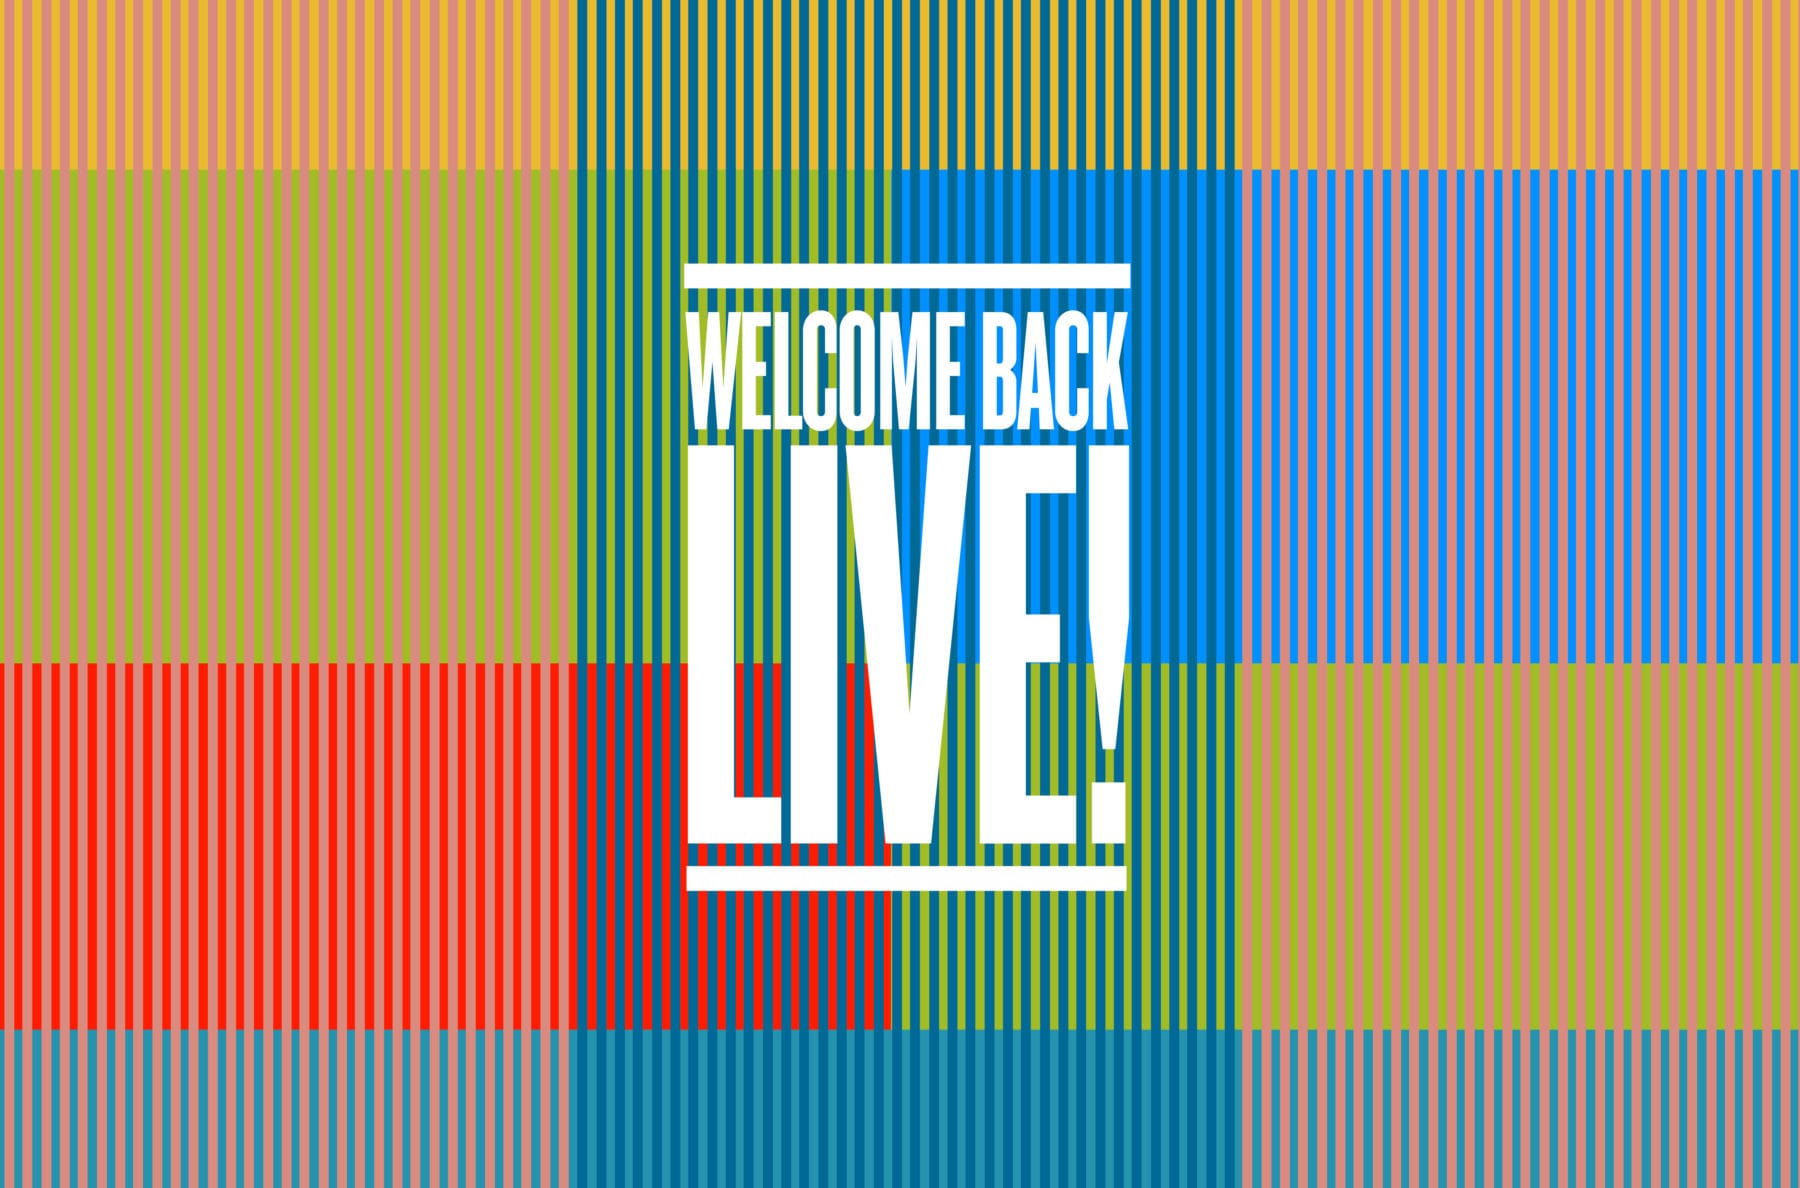 Welcome Back LIVE!